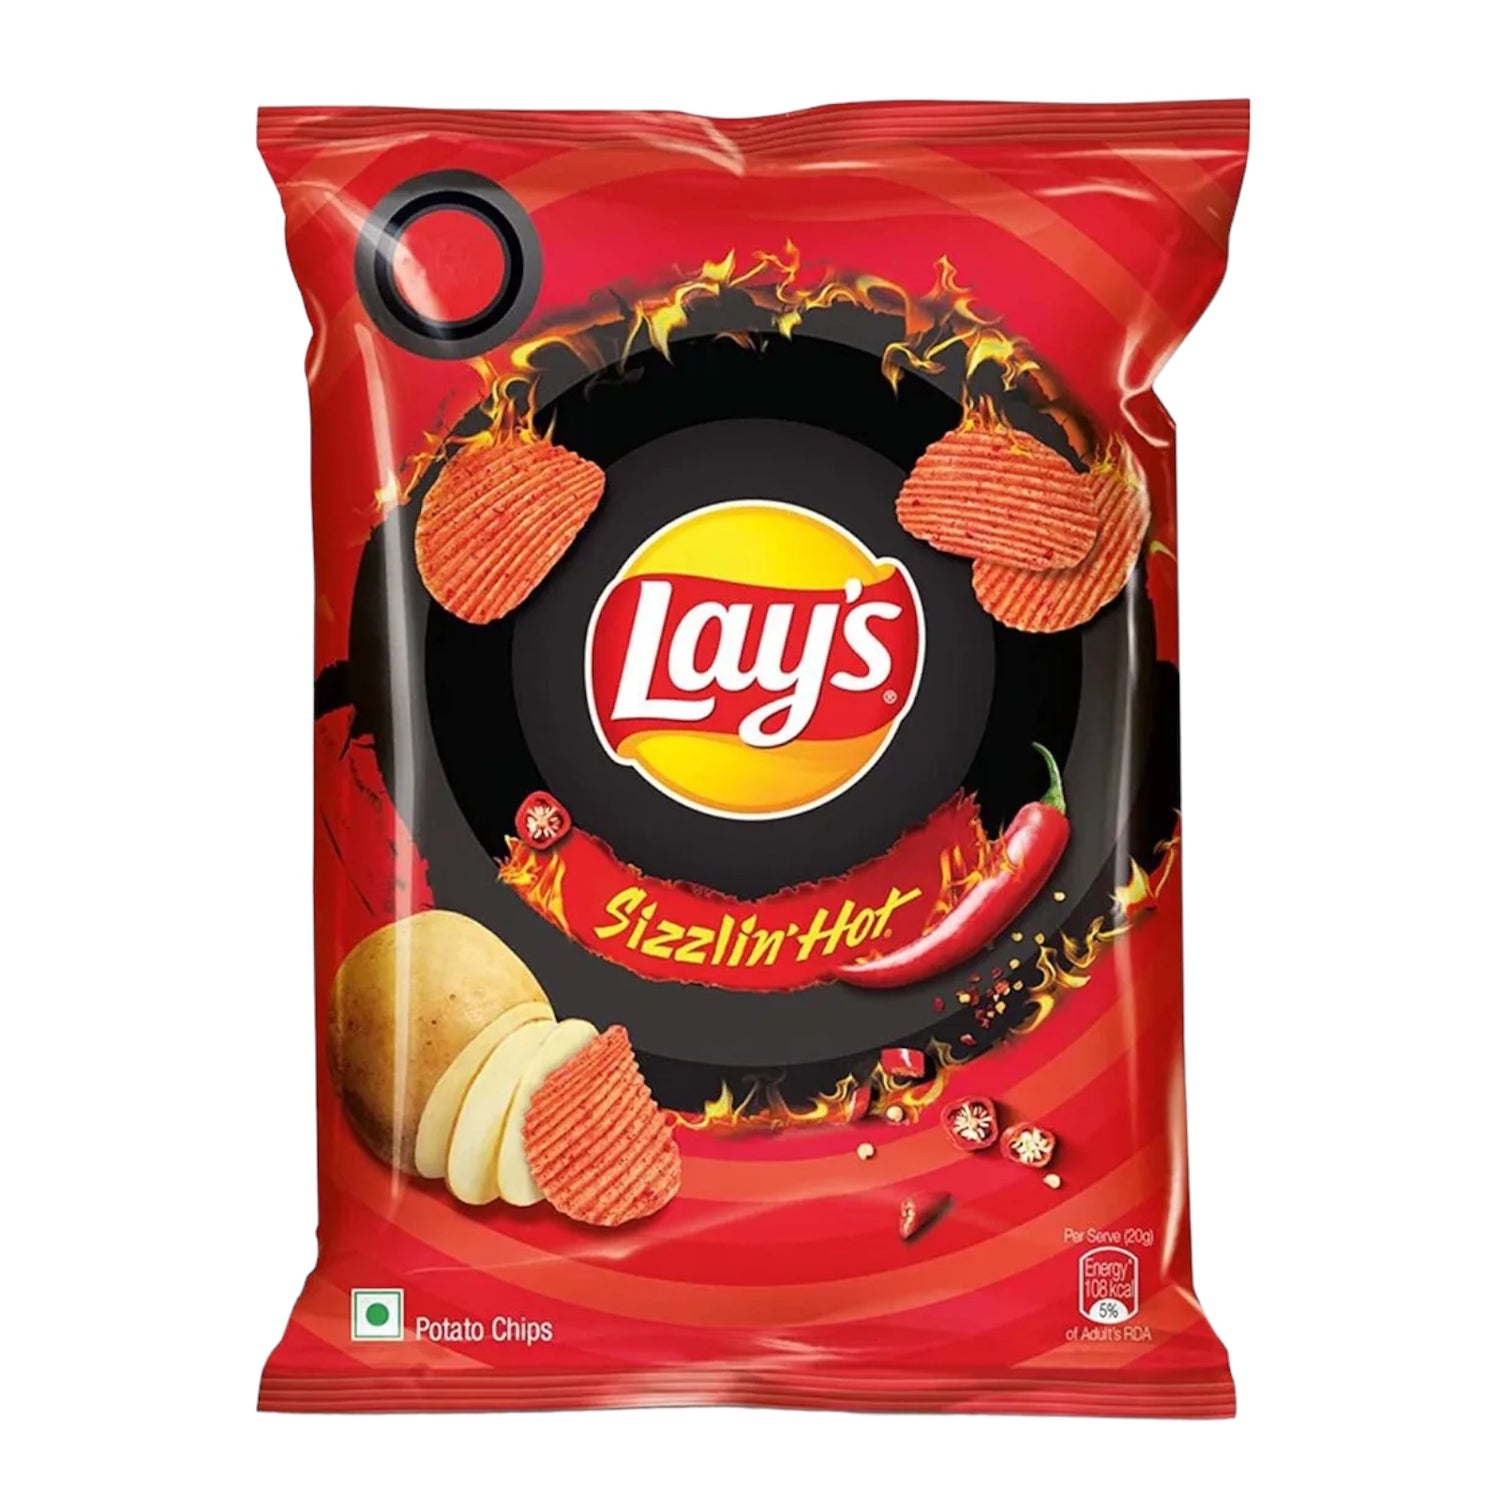 Lays Sizzling Hot (India)